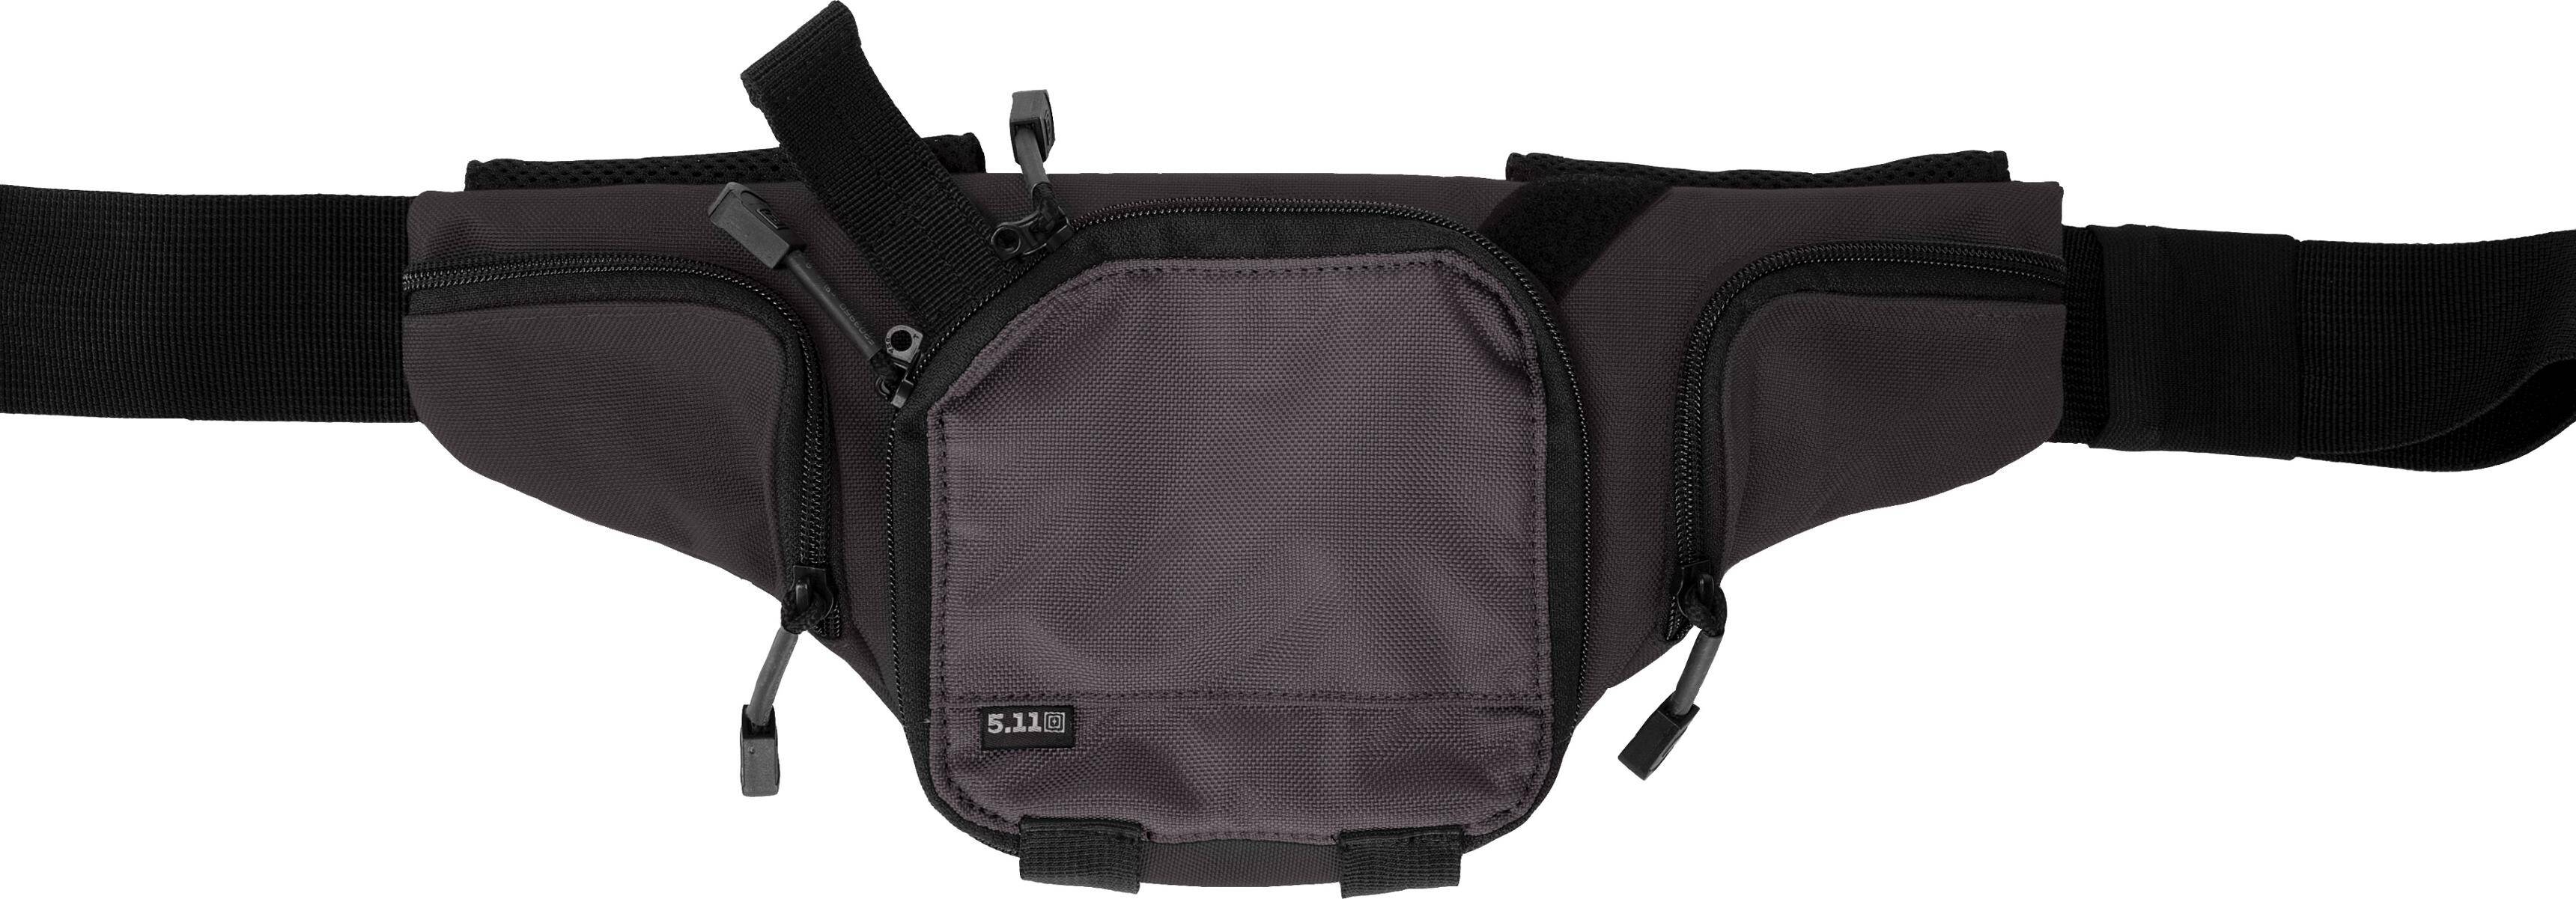 5.11 SELECT CARRY PISTOL POUCH